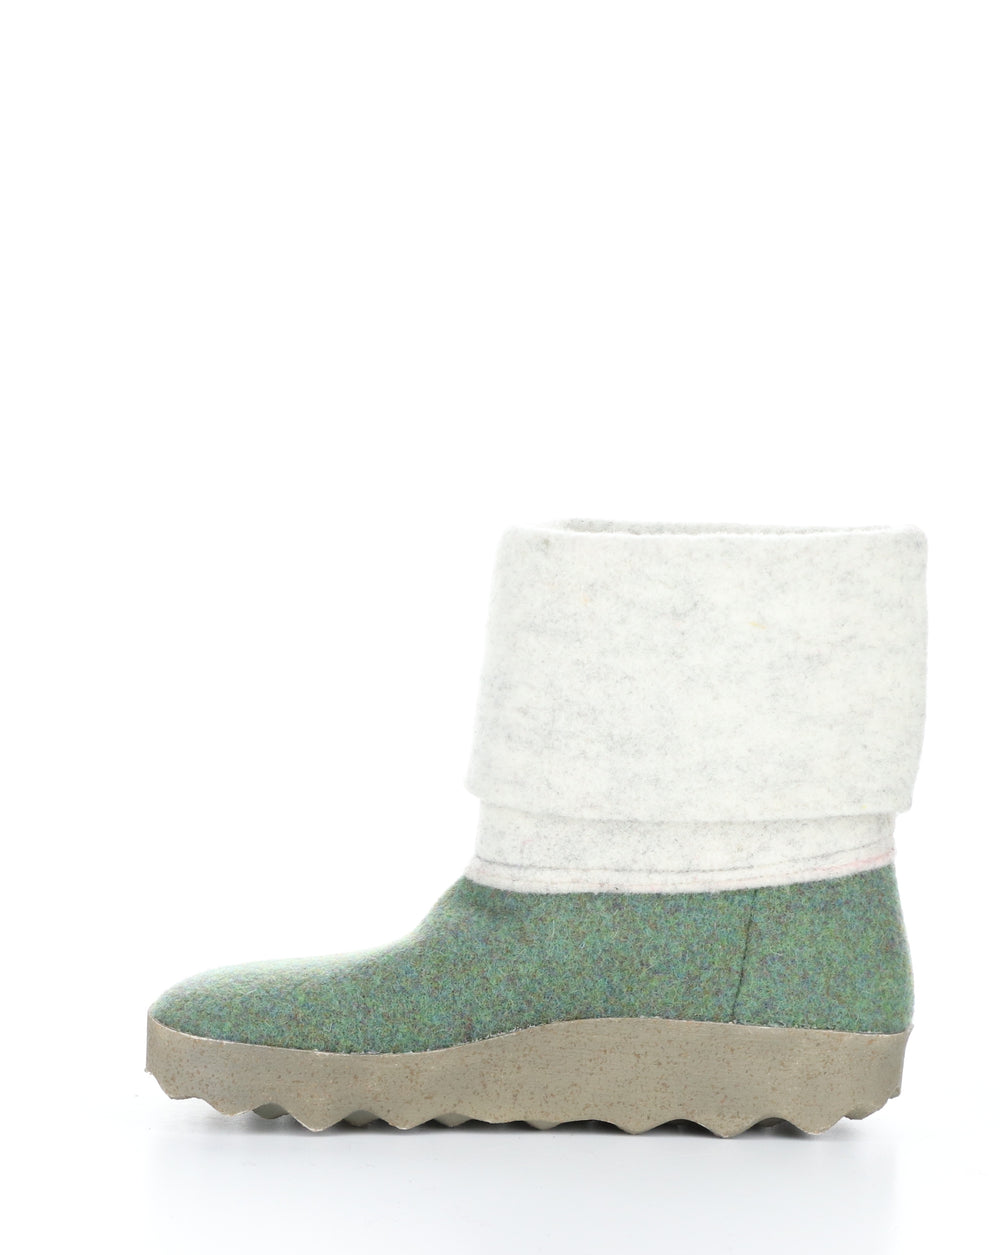 CADY137ASP Green Round Toe Boots